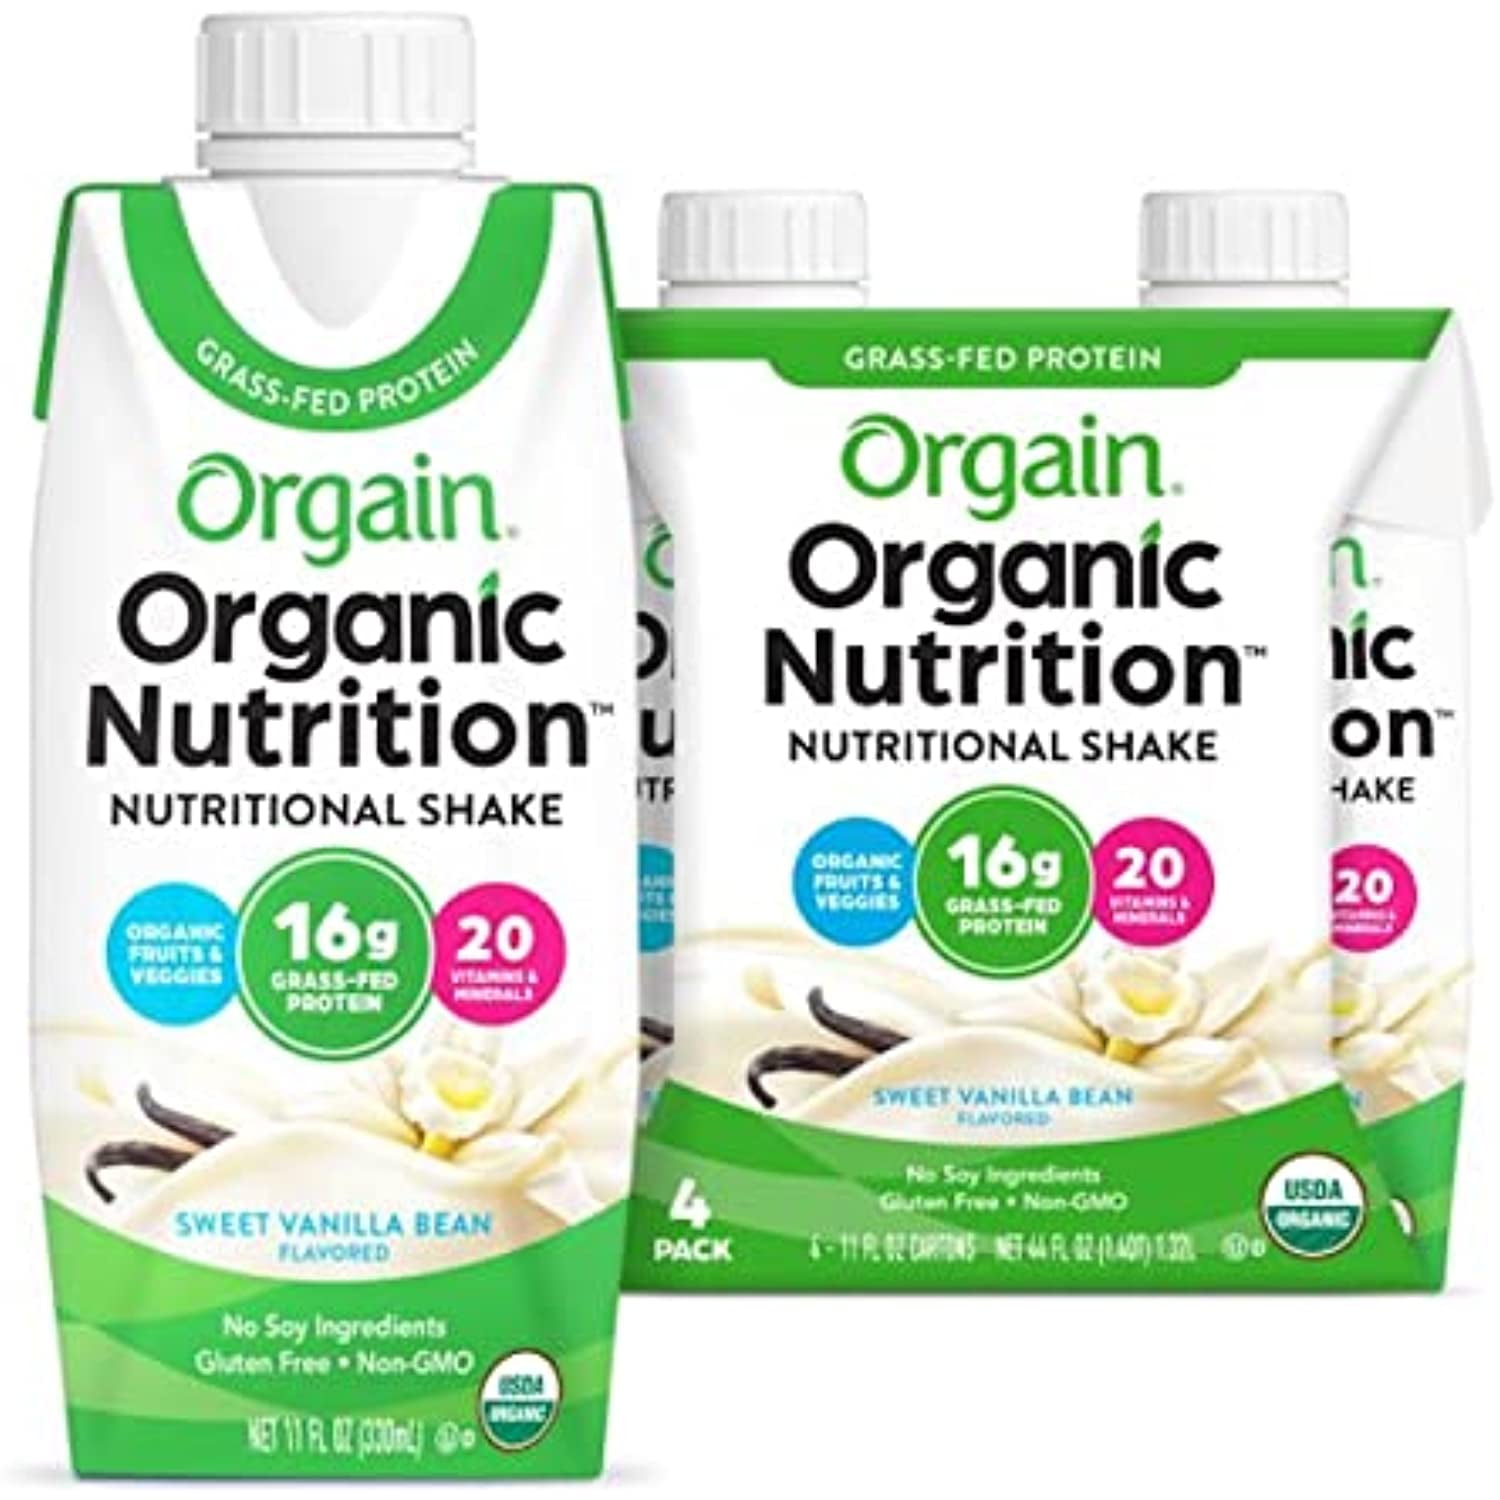 Orgain Clean Protein Shake, Grass Fed Dairy, Vanilla Bean - 20g Whey  Protein, Meal Replacement, Ready to Drink, Gluten Free, Soy Free, Kosher,  11 Fl